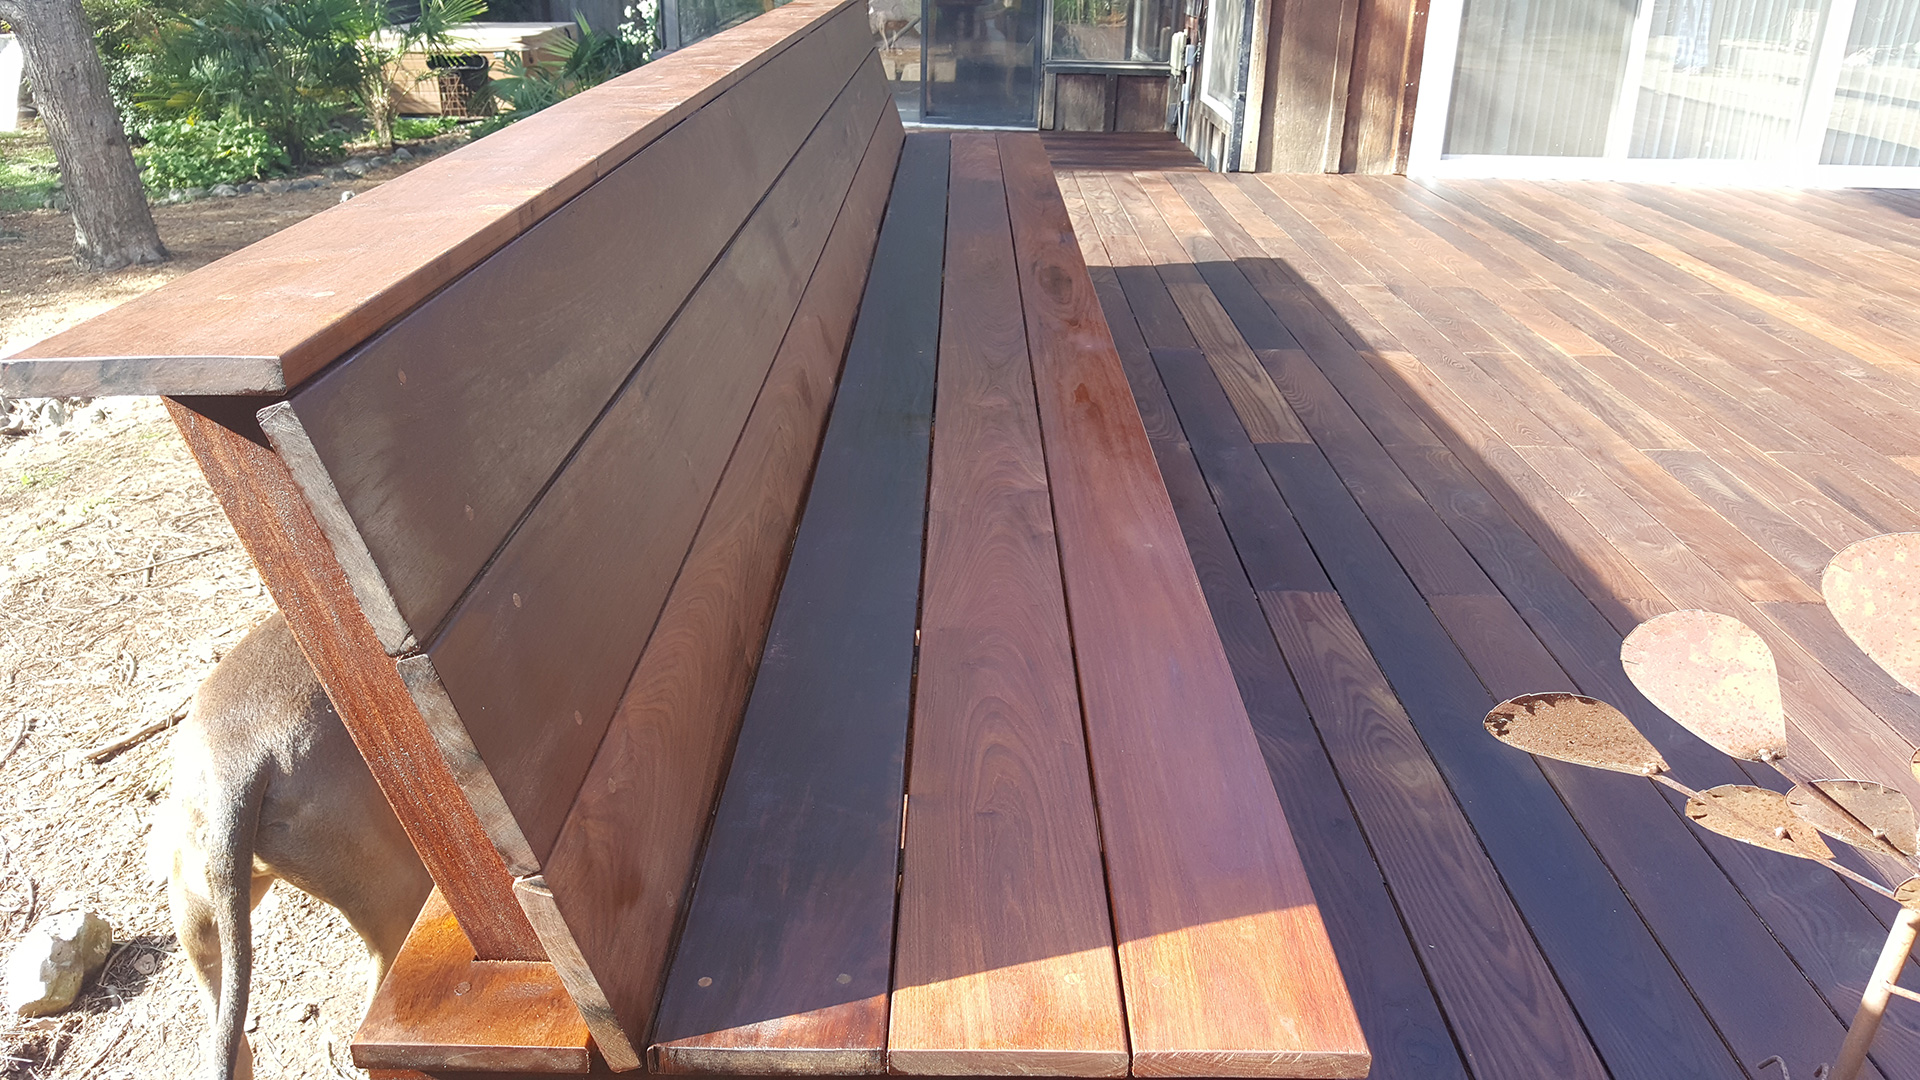 Americana Decking - thermally modified wood decking